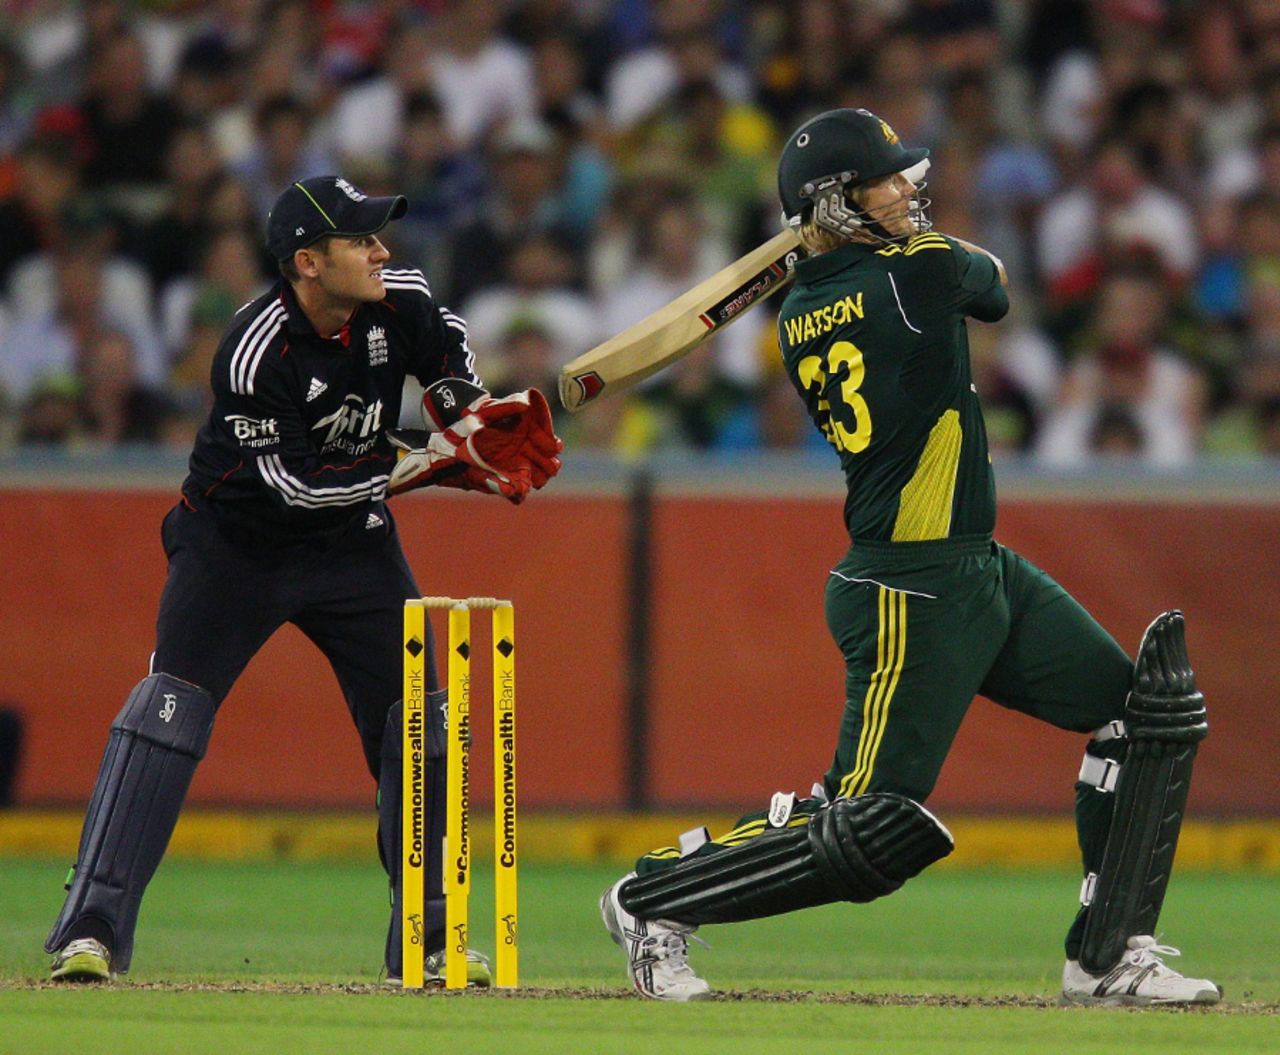 Shane Watson hits one of four sixes during his match-winning knock, Australia v England, 1st ODI, Melbourne, January 16, 2010